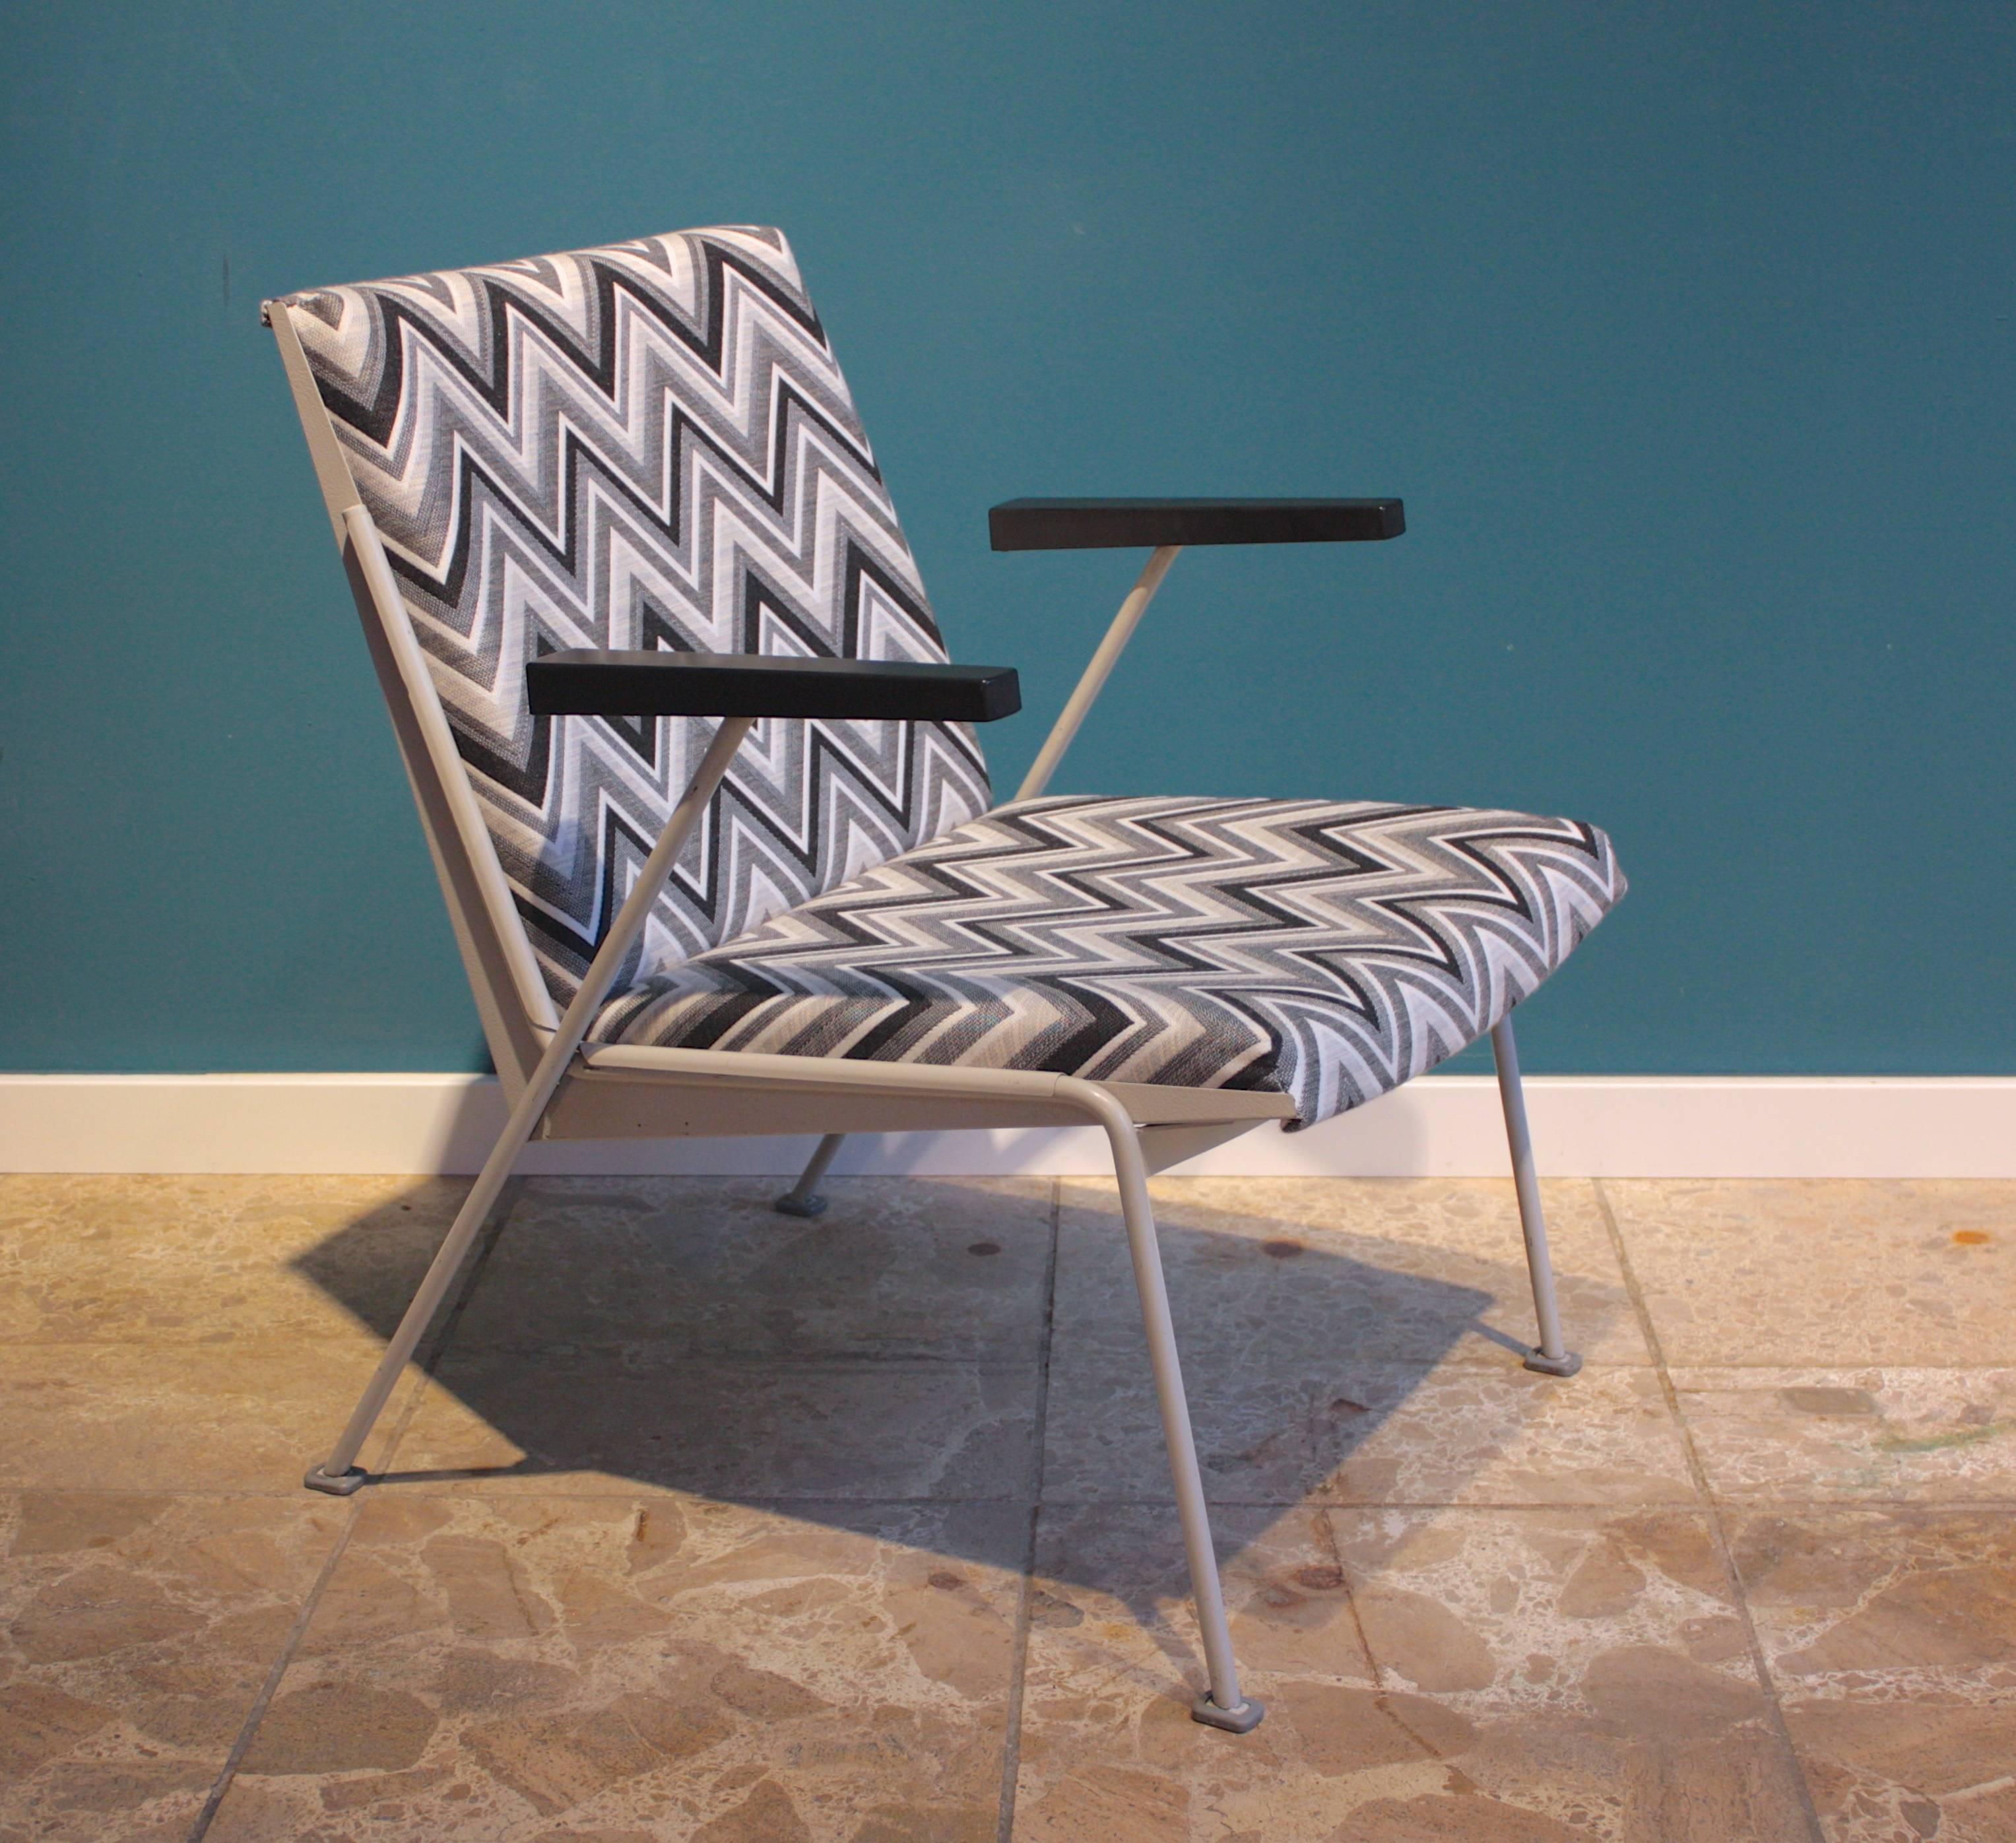 The Oase chair was designed by Wim Rietveld for Ahrend de Cirkel in 1958. The frame structure is made of grey lacquered steel, the armrests are made of bakelite. The chair is newly upholstered with graphic black and white zig zag patterned fabric.